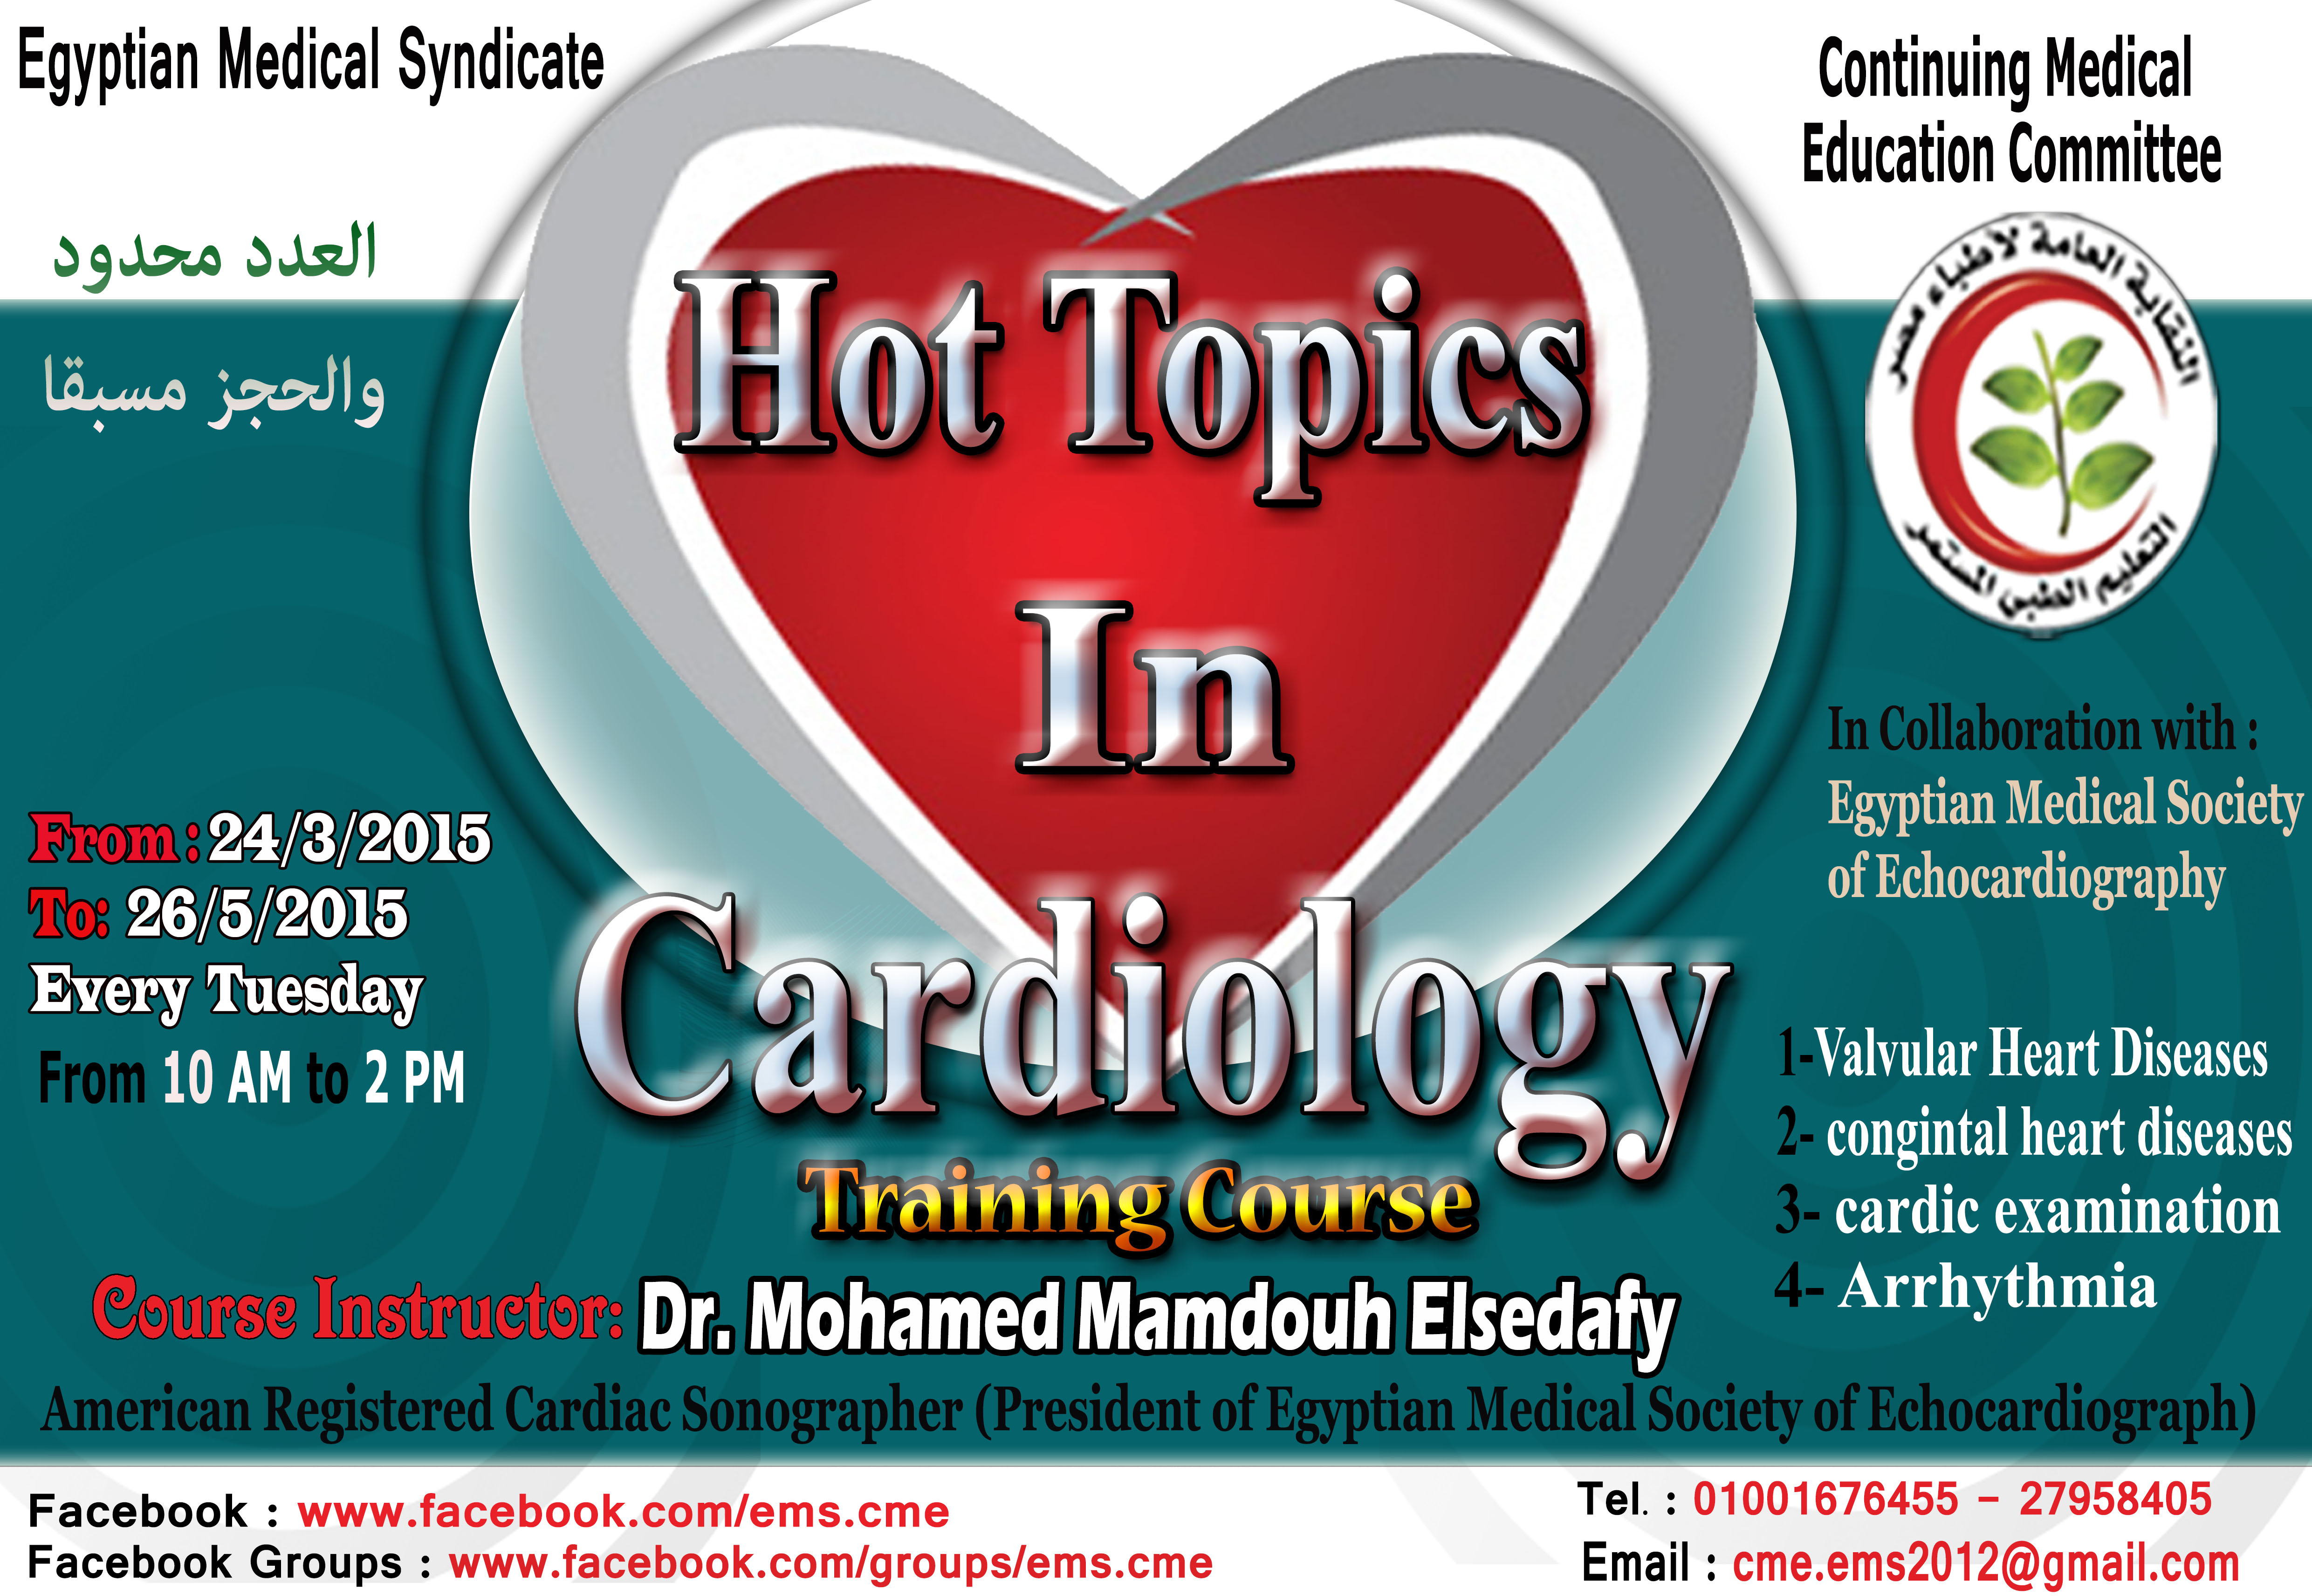 Hot Topics In Cardiology tranig course